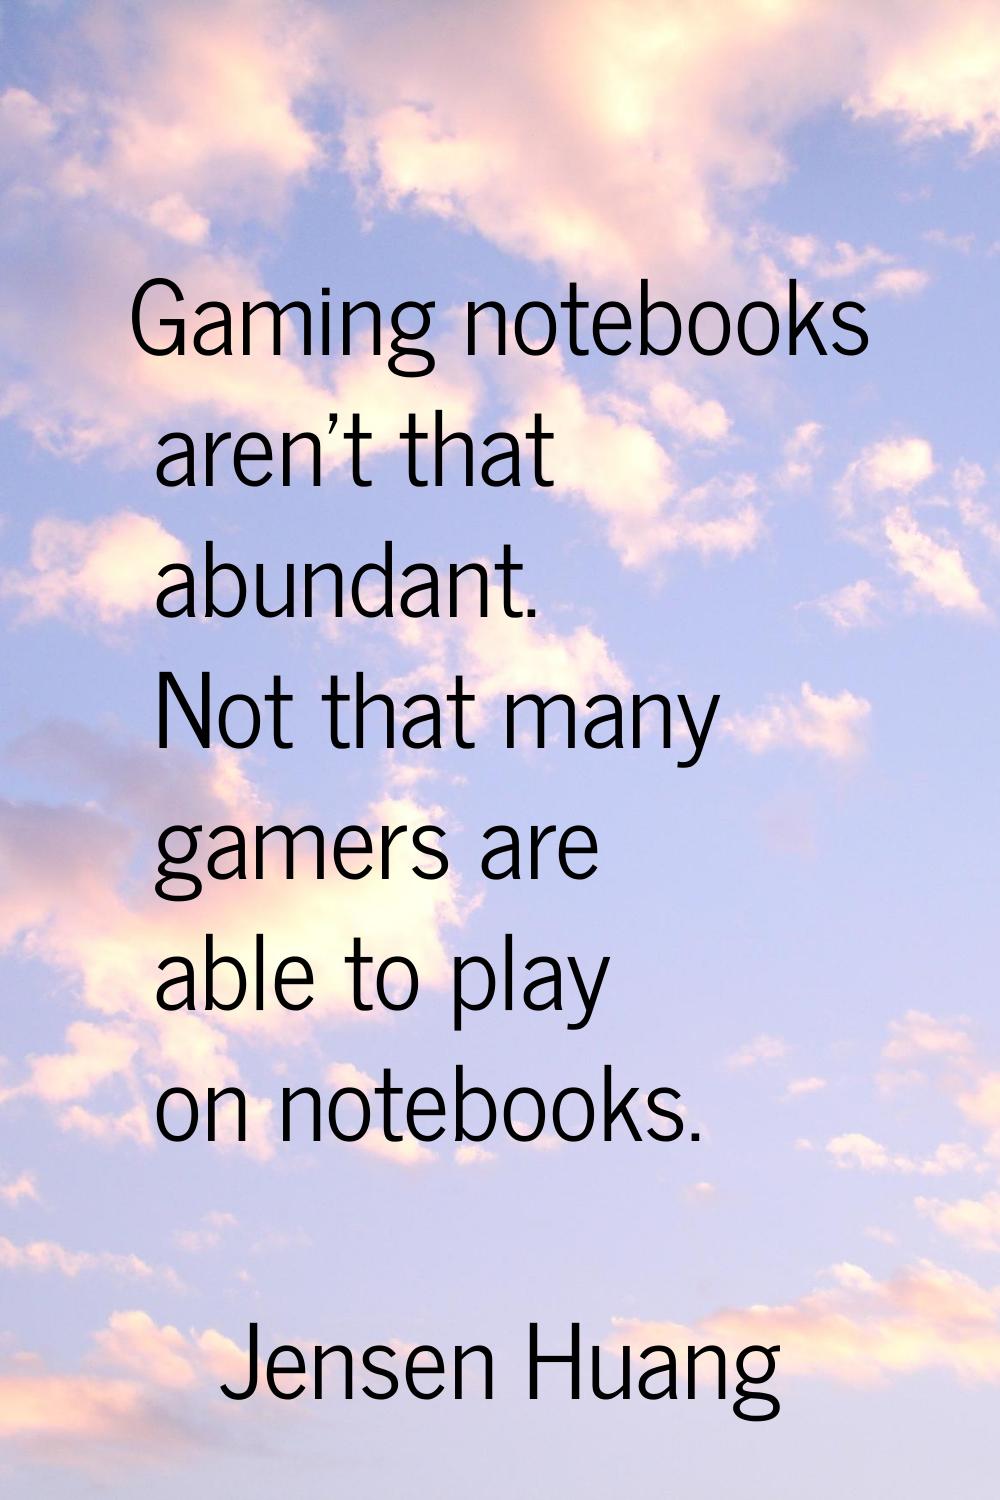 Gaming notebooks aren't that abundant. Not that many gamers are able to play on notebooks.